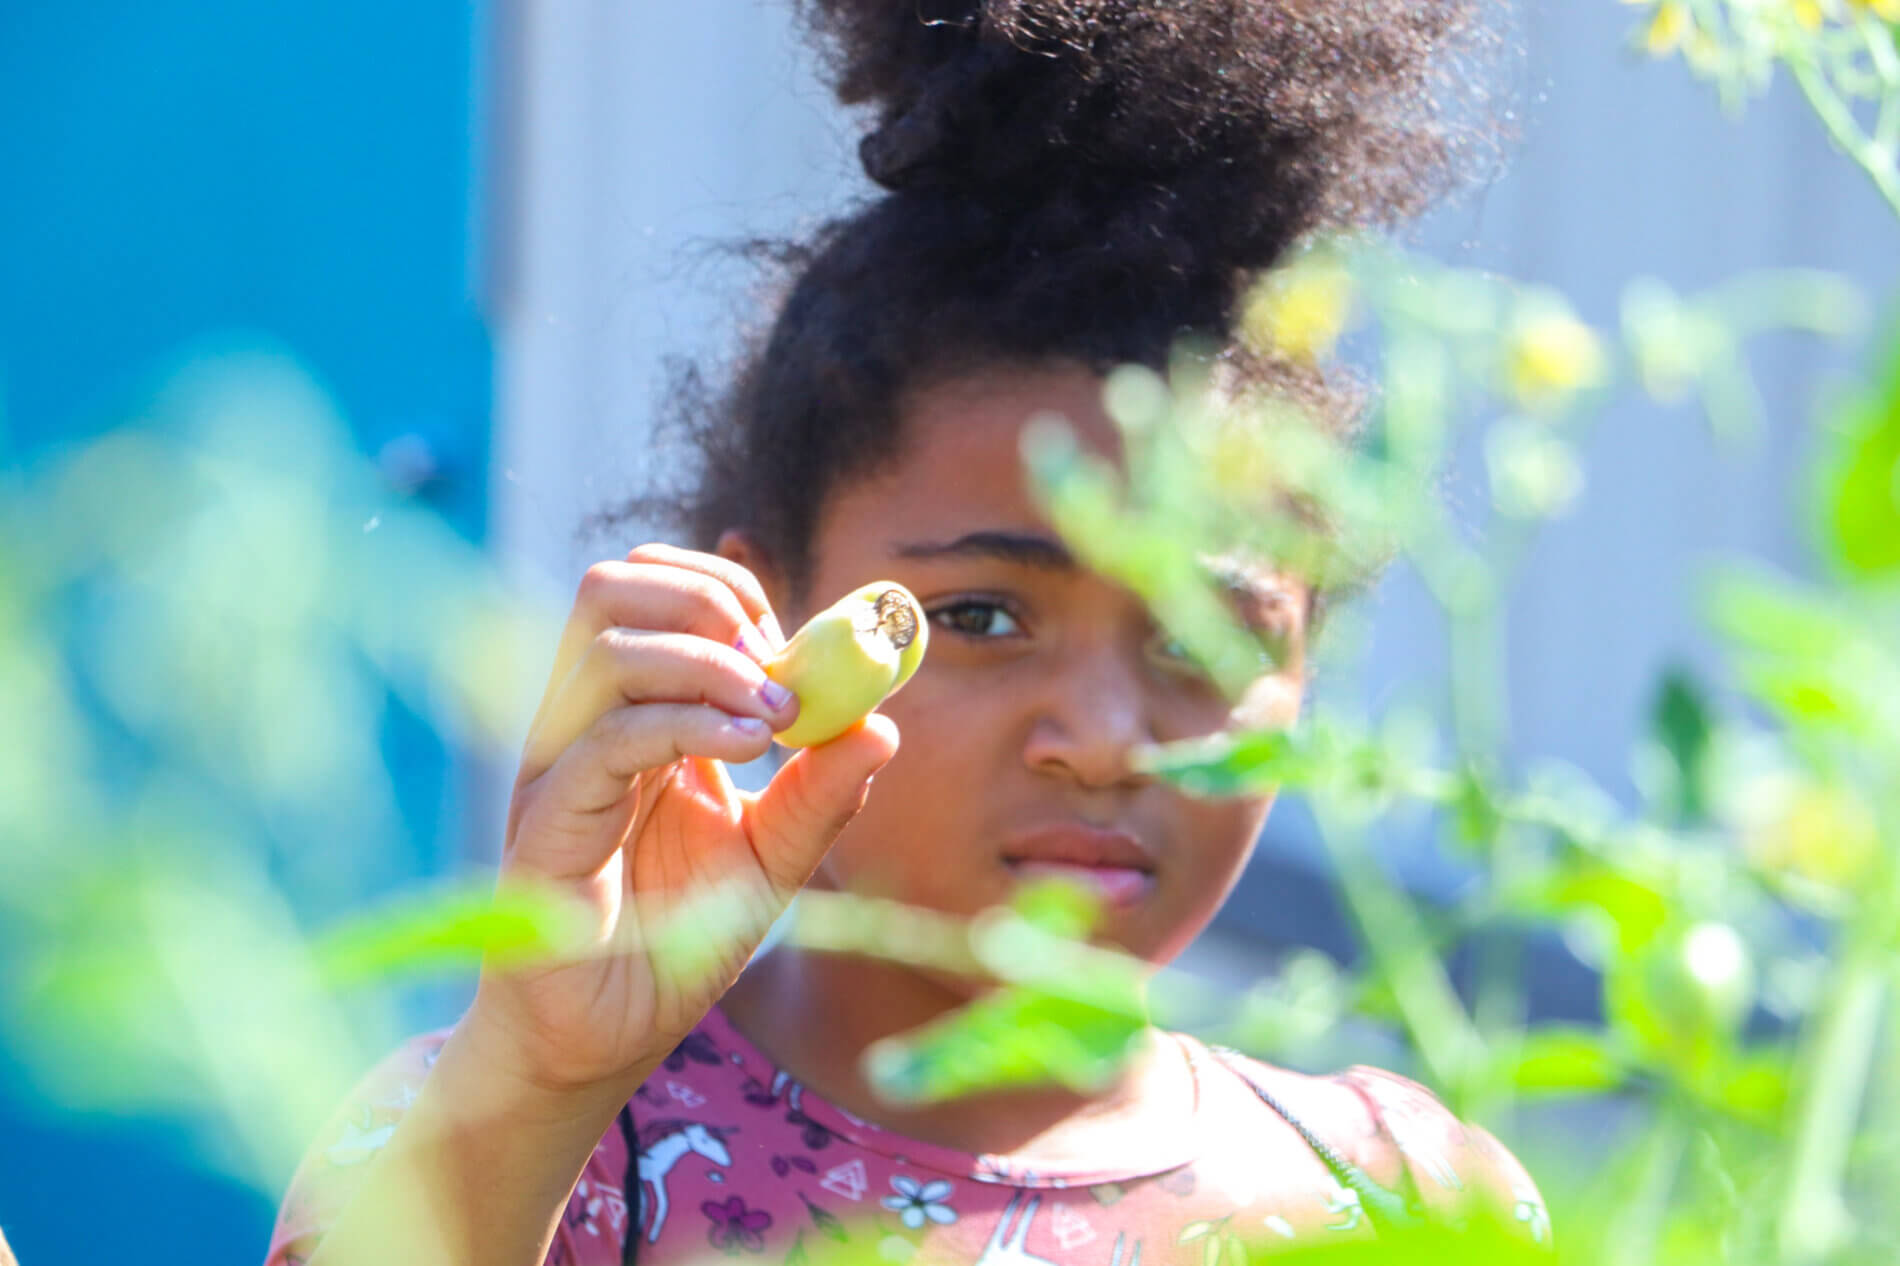 A teenage girl shows off the products in her school's community garden.